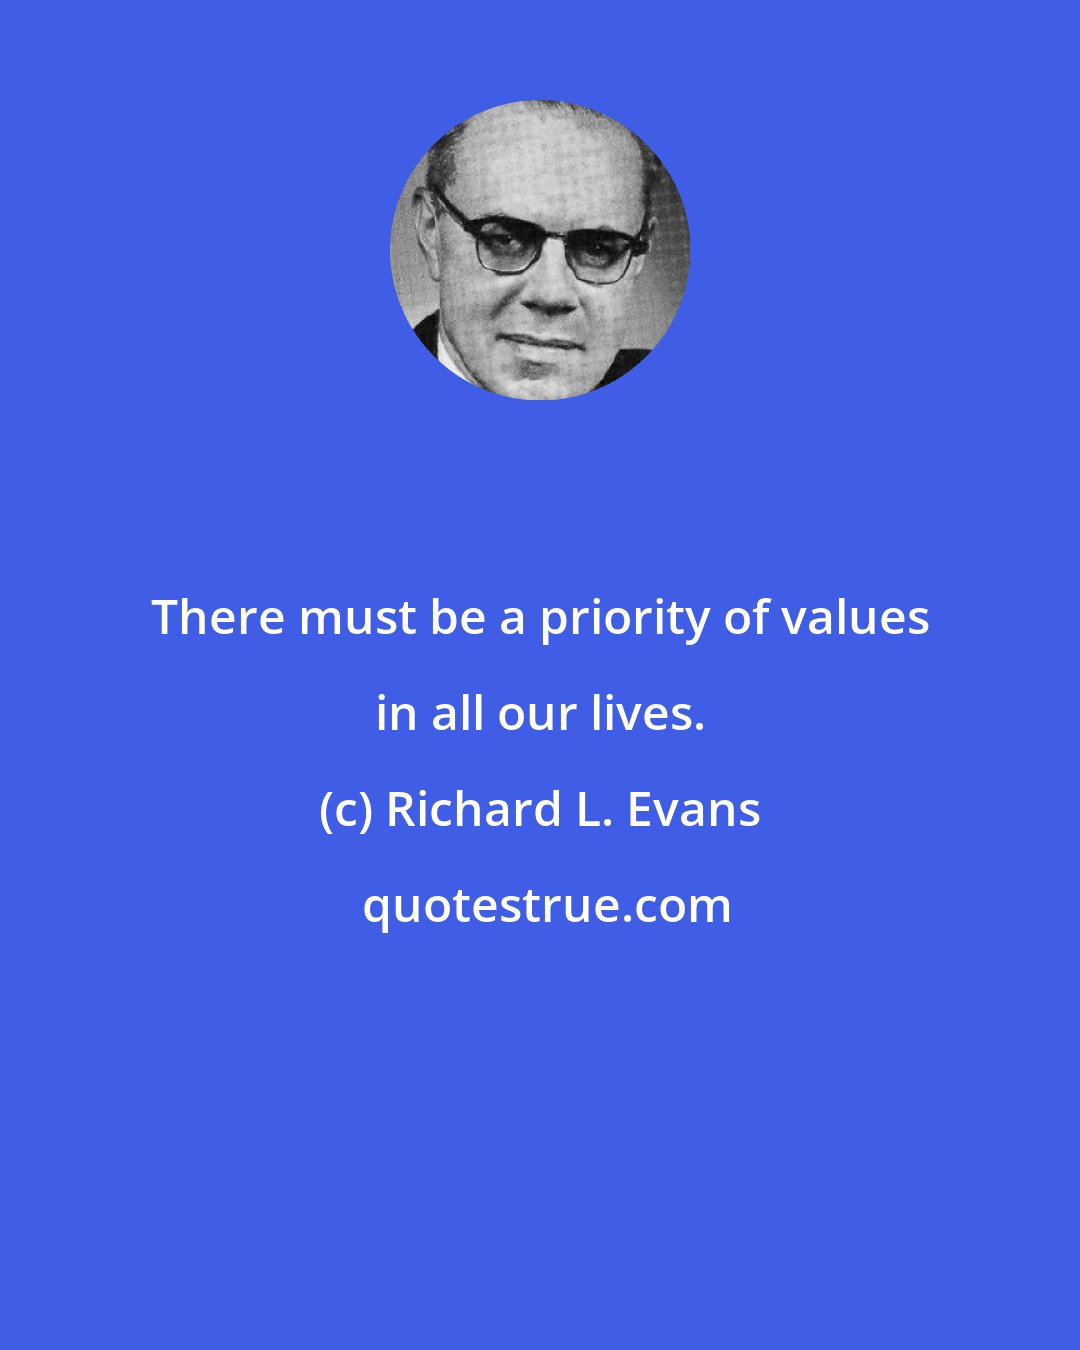 Richard L. Evans: There must be a priority of values in all our lives.